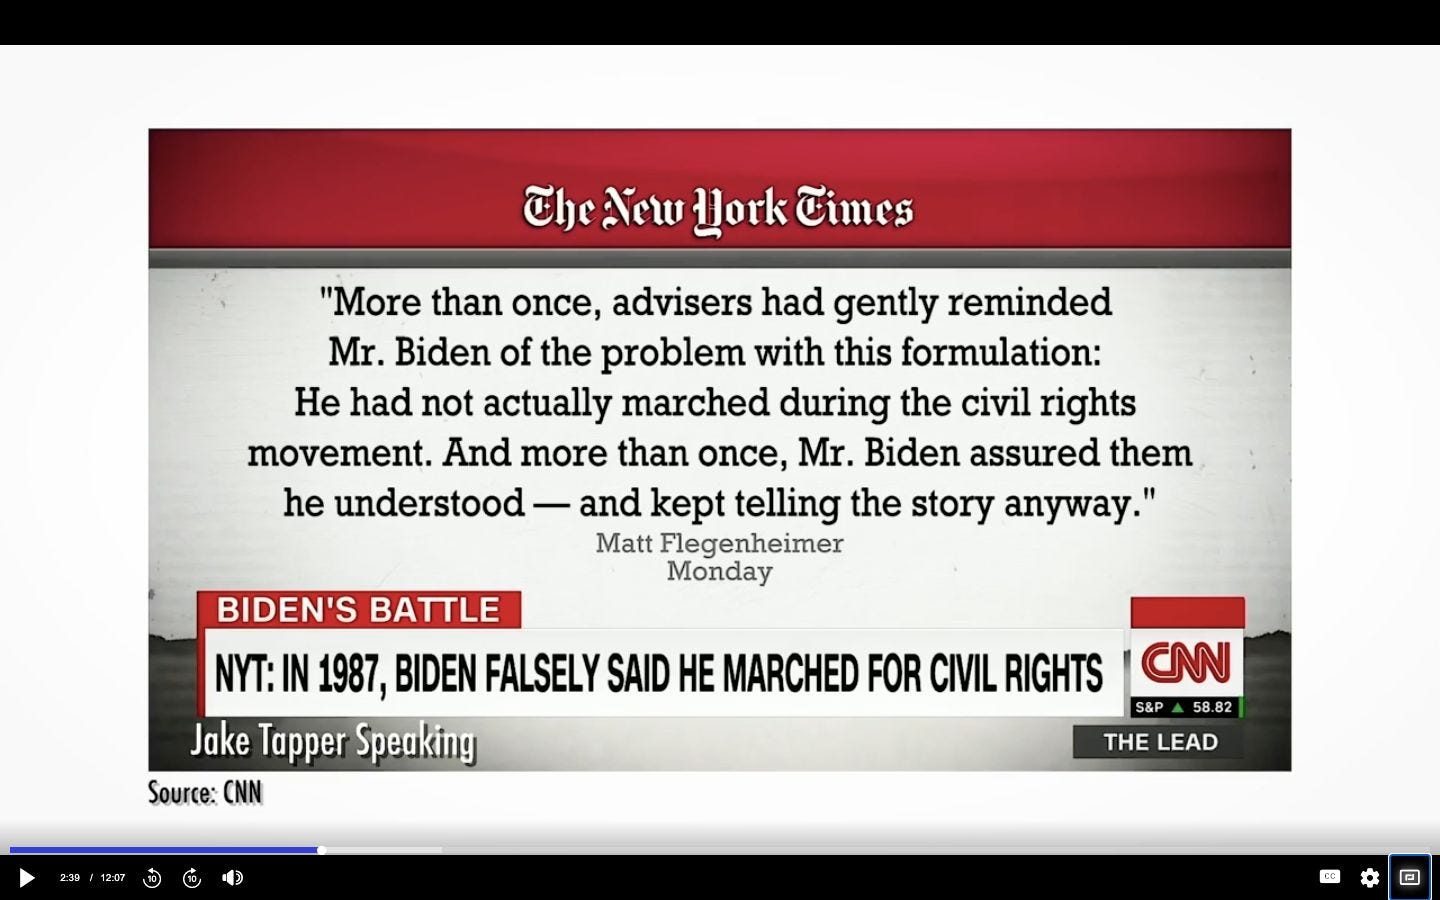 May be an image of text that says 'The New Hork Times "More than once, advisers had gently reminded Mr. Biden of the problem with this formulation: He had not actually marched during the civil rights movement. And more than once, Mr. Biden assured them he understood and kept telling the story anyway." Matt Flegenheimer Monday BIDEN'S BATTLE NYT: IN 1987, BIDEN FALSELY SAID He MARCHED FOR CIVIL RIGHTS Jake Tapper Speaking Source: CNN CNN S&P 8.82 THE LEAD 回'